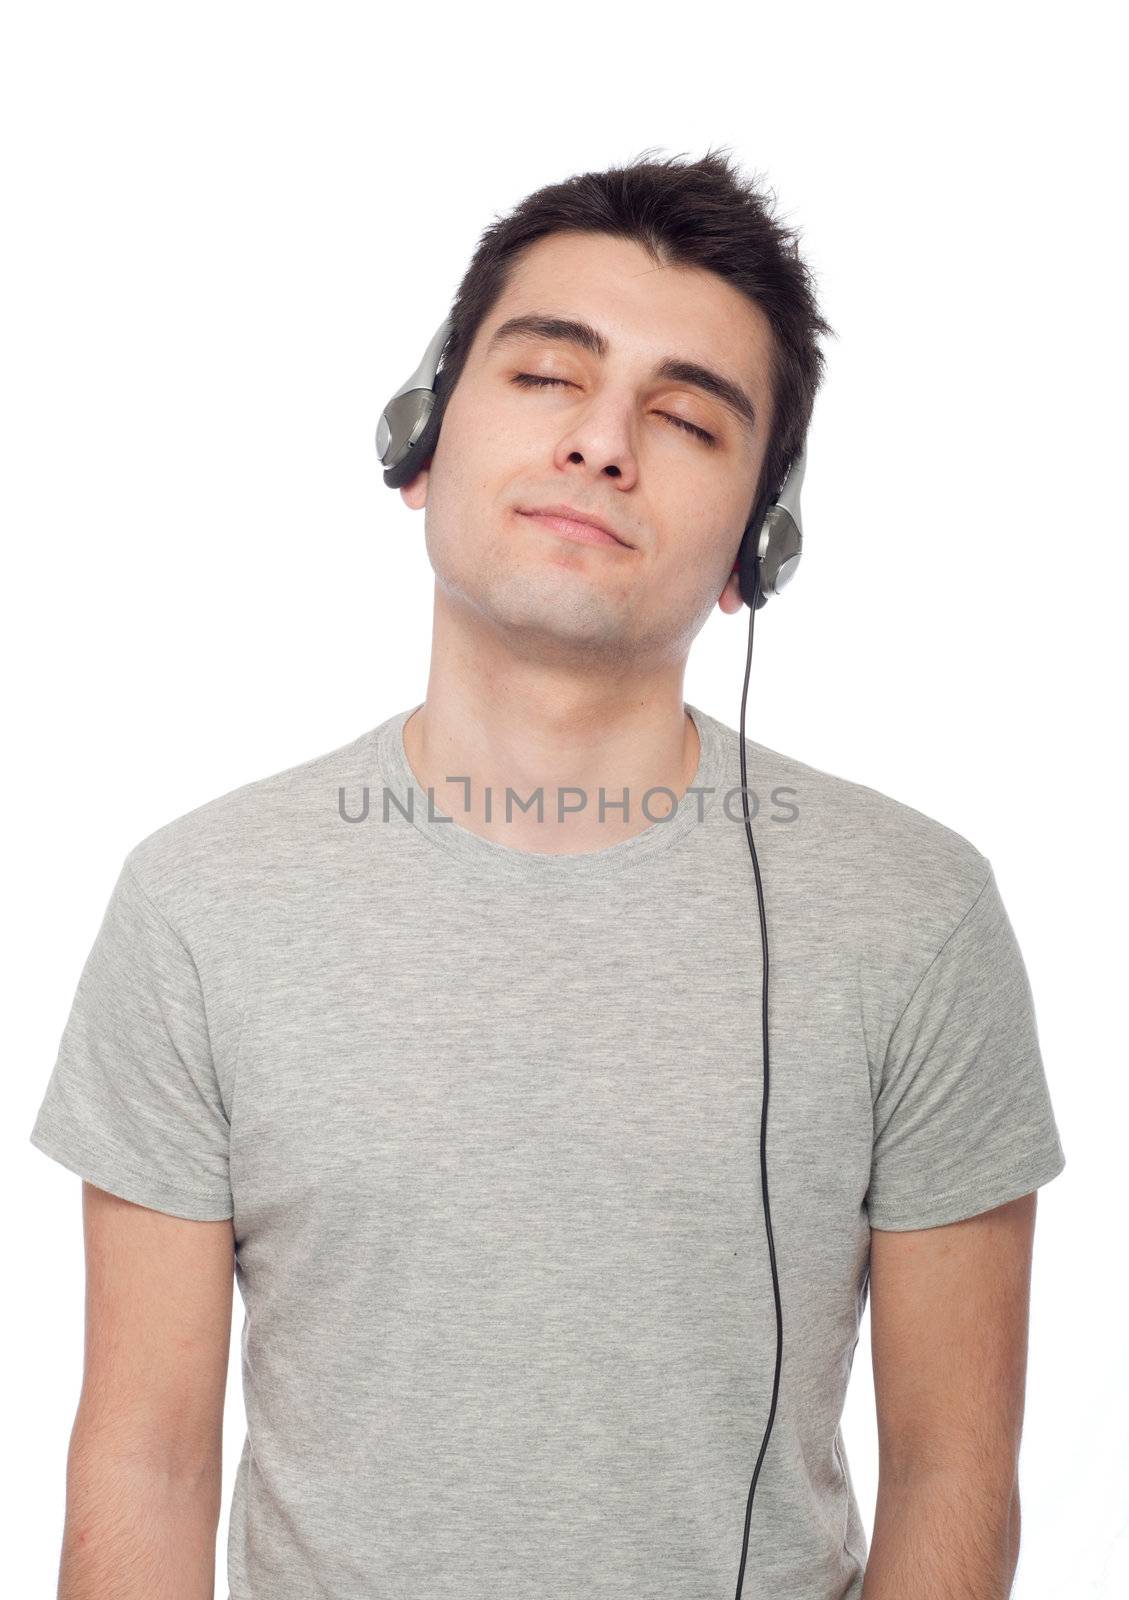 Casual man listening music by luissantos84